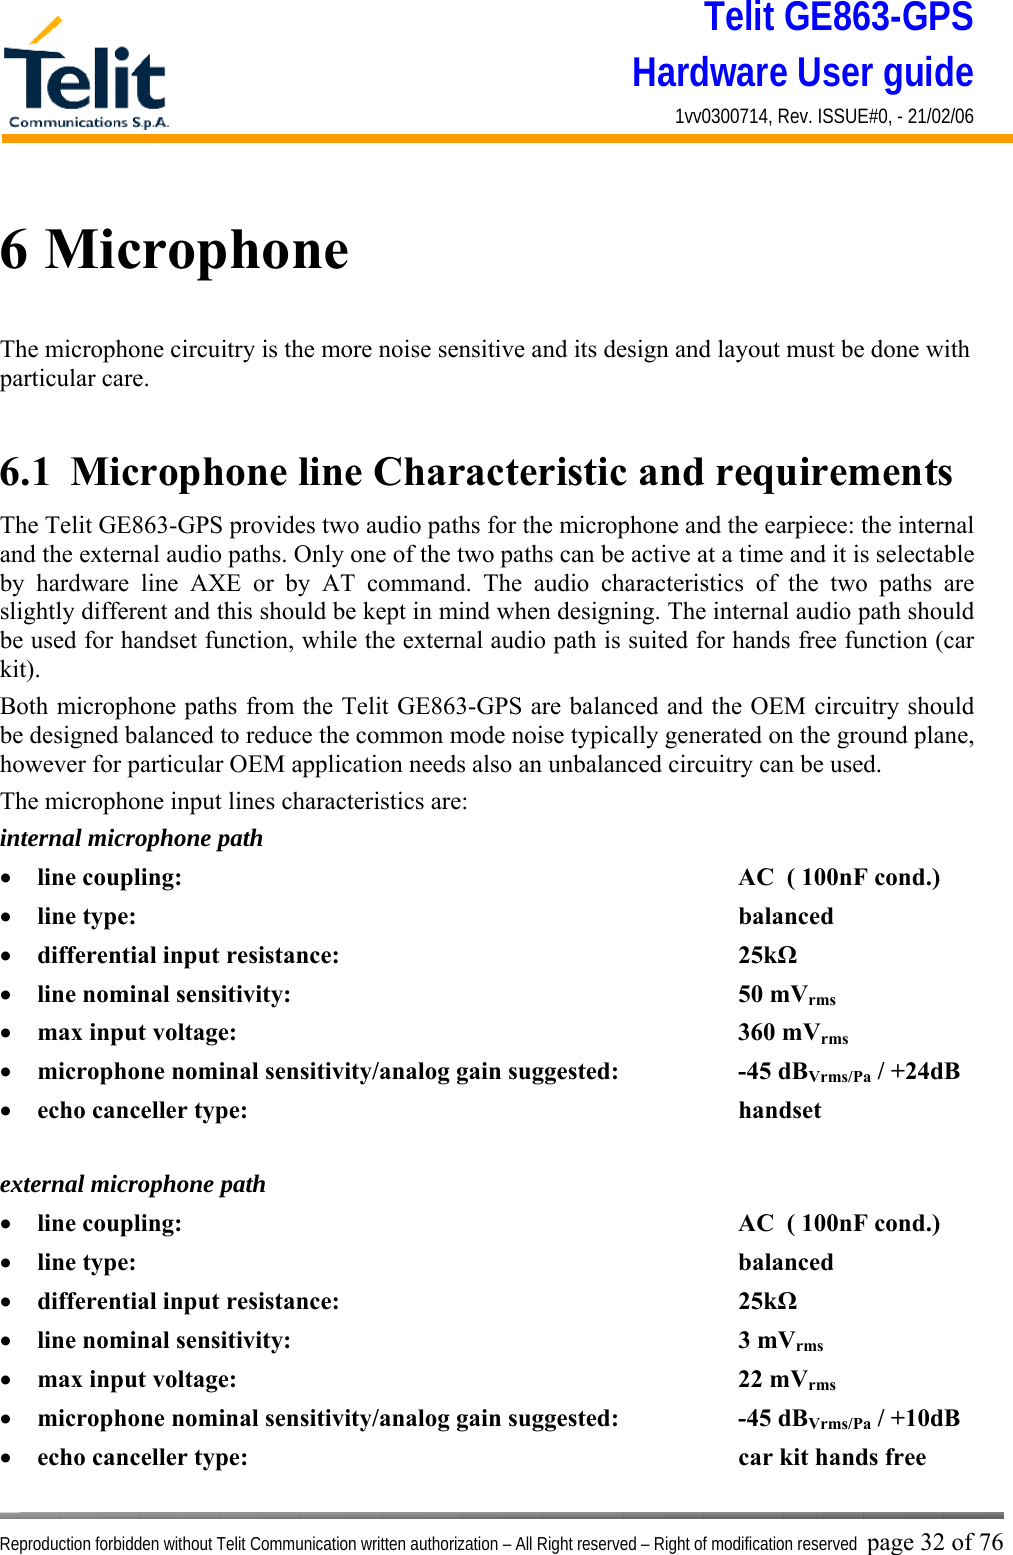 Telit GE863-GPS Hardware User guide 1vv0300714, Rev. ISSUE#0, - 21/02/06    Reproduction forbidden without Telit Communication written authorization – All Right reserved – Right of modification reserved page 32 of 76 6 Microphone The microphone circuitry is the more noise sensitive and its design and layout must be done with particular care.  6.1  Microphone line Characteristic and requirements The Telit GE863-GPS provides two audio paths for the microphone and the earpiece: the internal and the external audio paths. Only one of the two paths can be active at a time and it is selectable by hardware line AXE or by AT command. The audio characteristics of the two paths are slightly different and this should be kept in mind when designing. The internal audio path should be used for handset function, while the external audio path is suited for hands free function (car kit). Both microphone paths from the Telit GE863-GPS are balanced and the OEM circuitry should be designed balanced to reduce the common mode noise typically generated on the ground plane, however for particular OEM application needs also an unbalanced circuitry can be used. The microphone input lines characteristics are: internal microphone path •  line coupling:        AC  ( 100nF cond.) •  line type:         balanced •  differential input resistance:      25kΩ •  line nominal sensitivity:       50 mVrms •  max input voltage:       360 mVrms •  microphone nominal sensitivity/analog gain suggested:    -45 dBVrms/Pa / +24dB •  echo canceller type:       handset  external microphone path •  line coupling:        AC  ( 100nF cond.) •  line type:         balanced •  differential input resistance:      25kΩ •  line nominal sensitivity:       3 mVrms •  max input voltage:       22 mVrms •  microphone nominal sensitivity/analog gain suggested:    -45 dBVrms/Pa / +10dB •  echo canceller type:       car kit hands free 